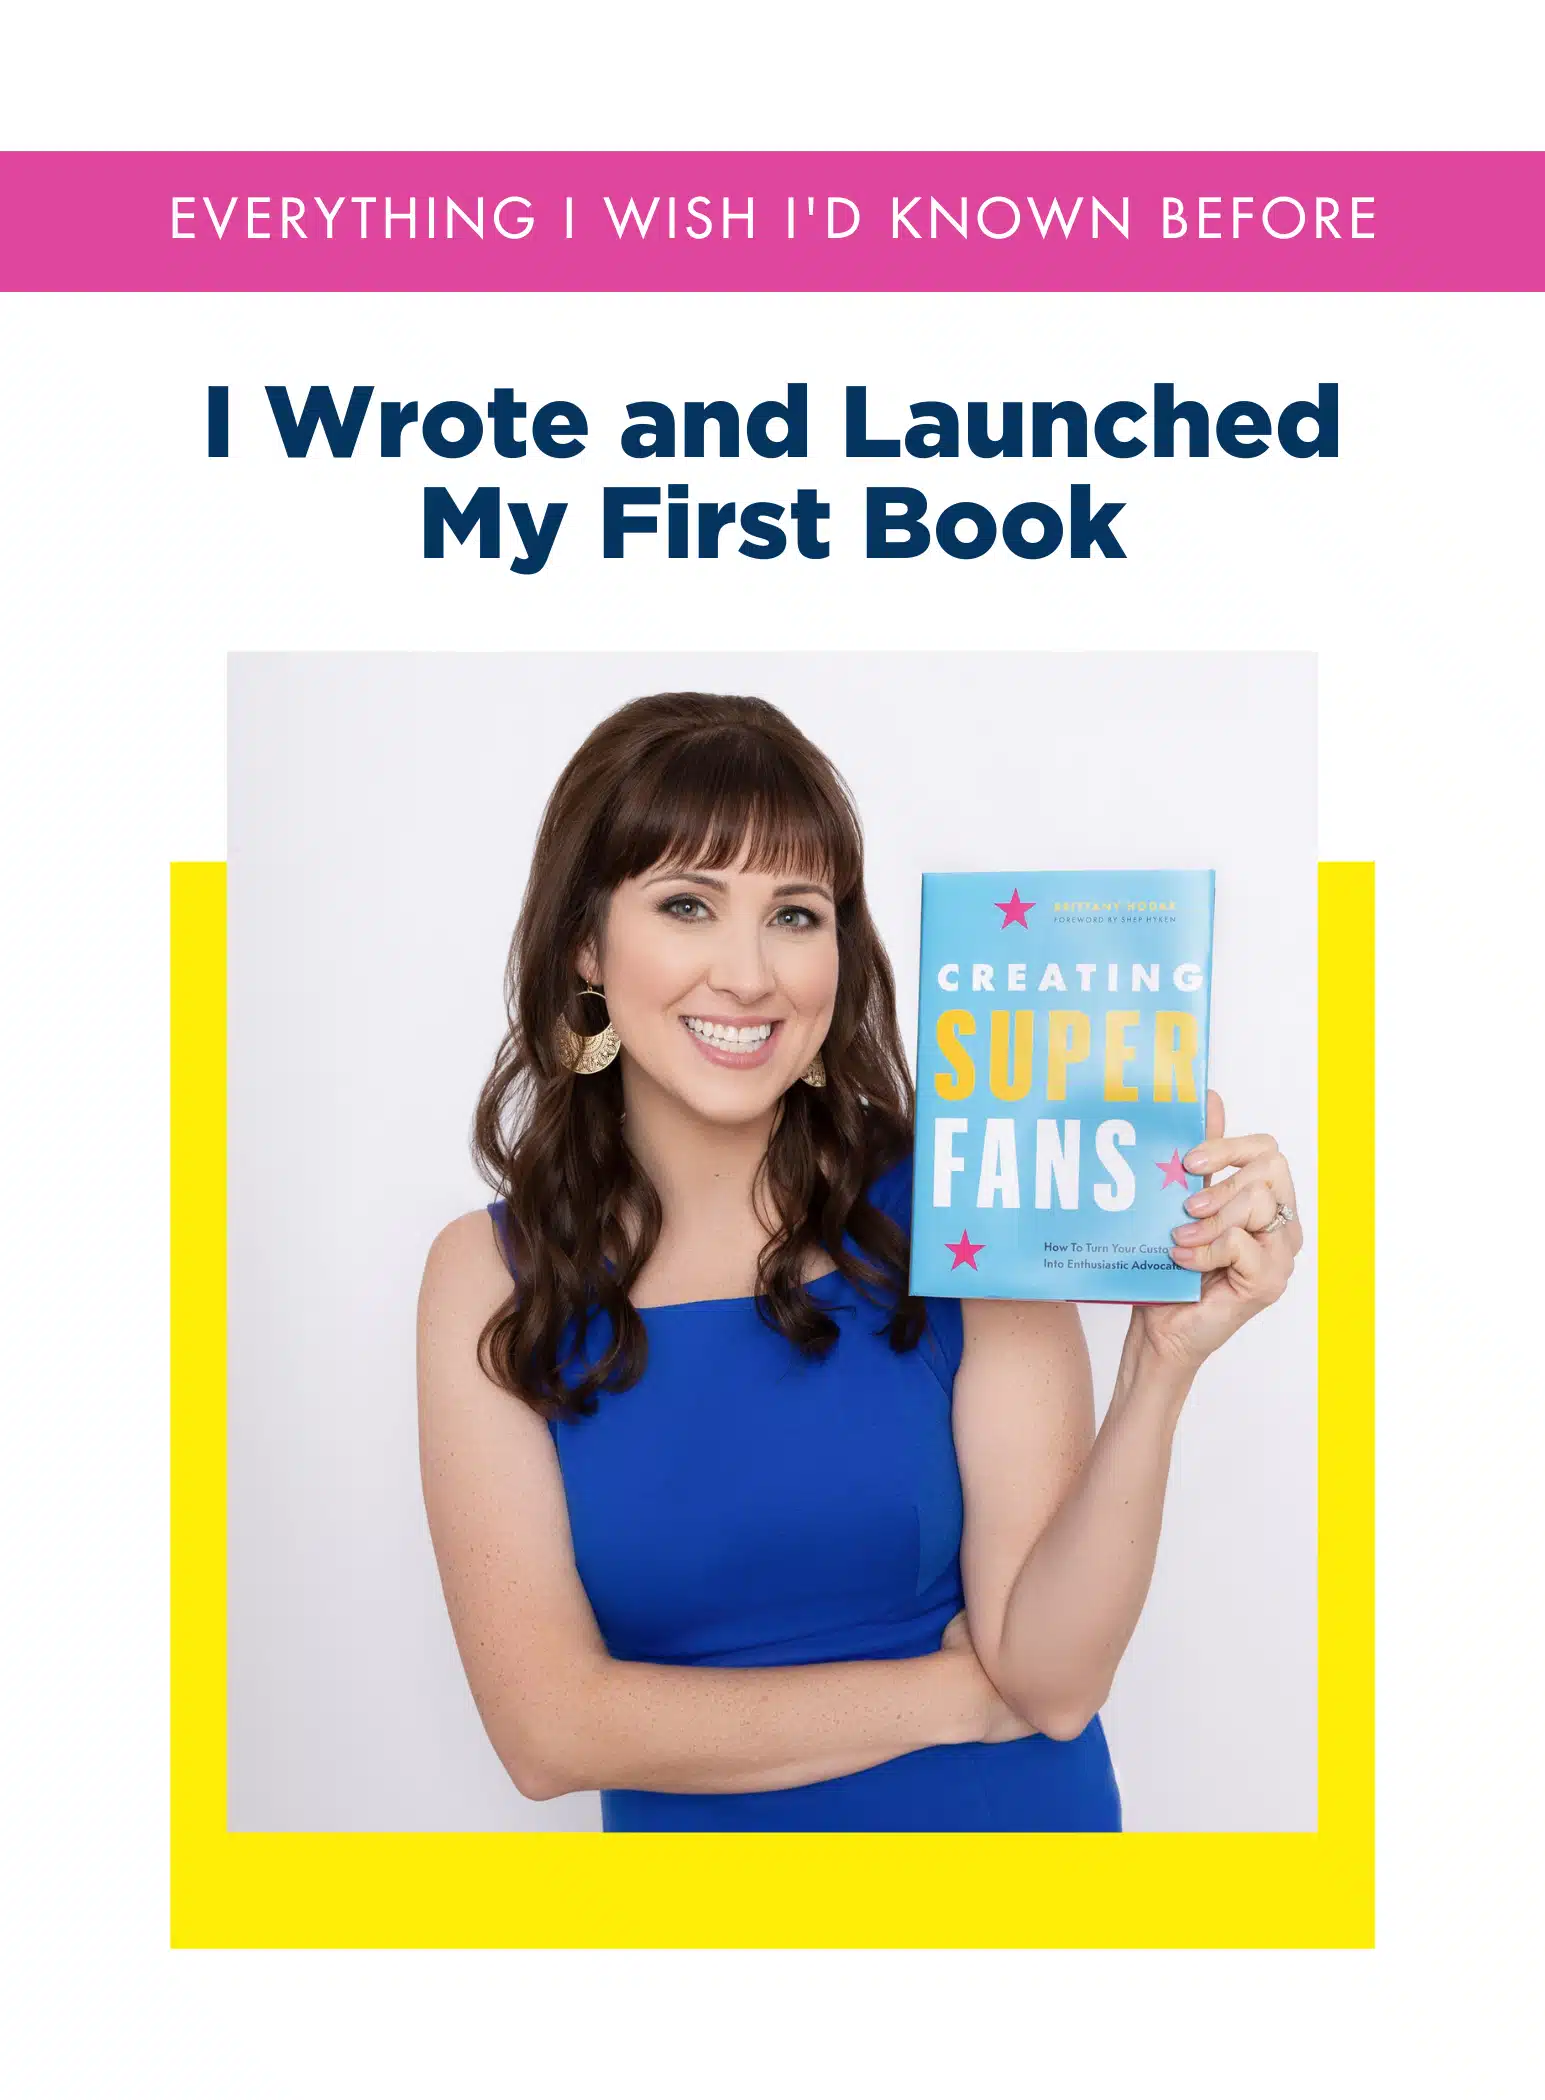 Everything I Wish I'd Known Before I wrote and Launched my First Book - Brittany Hodak